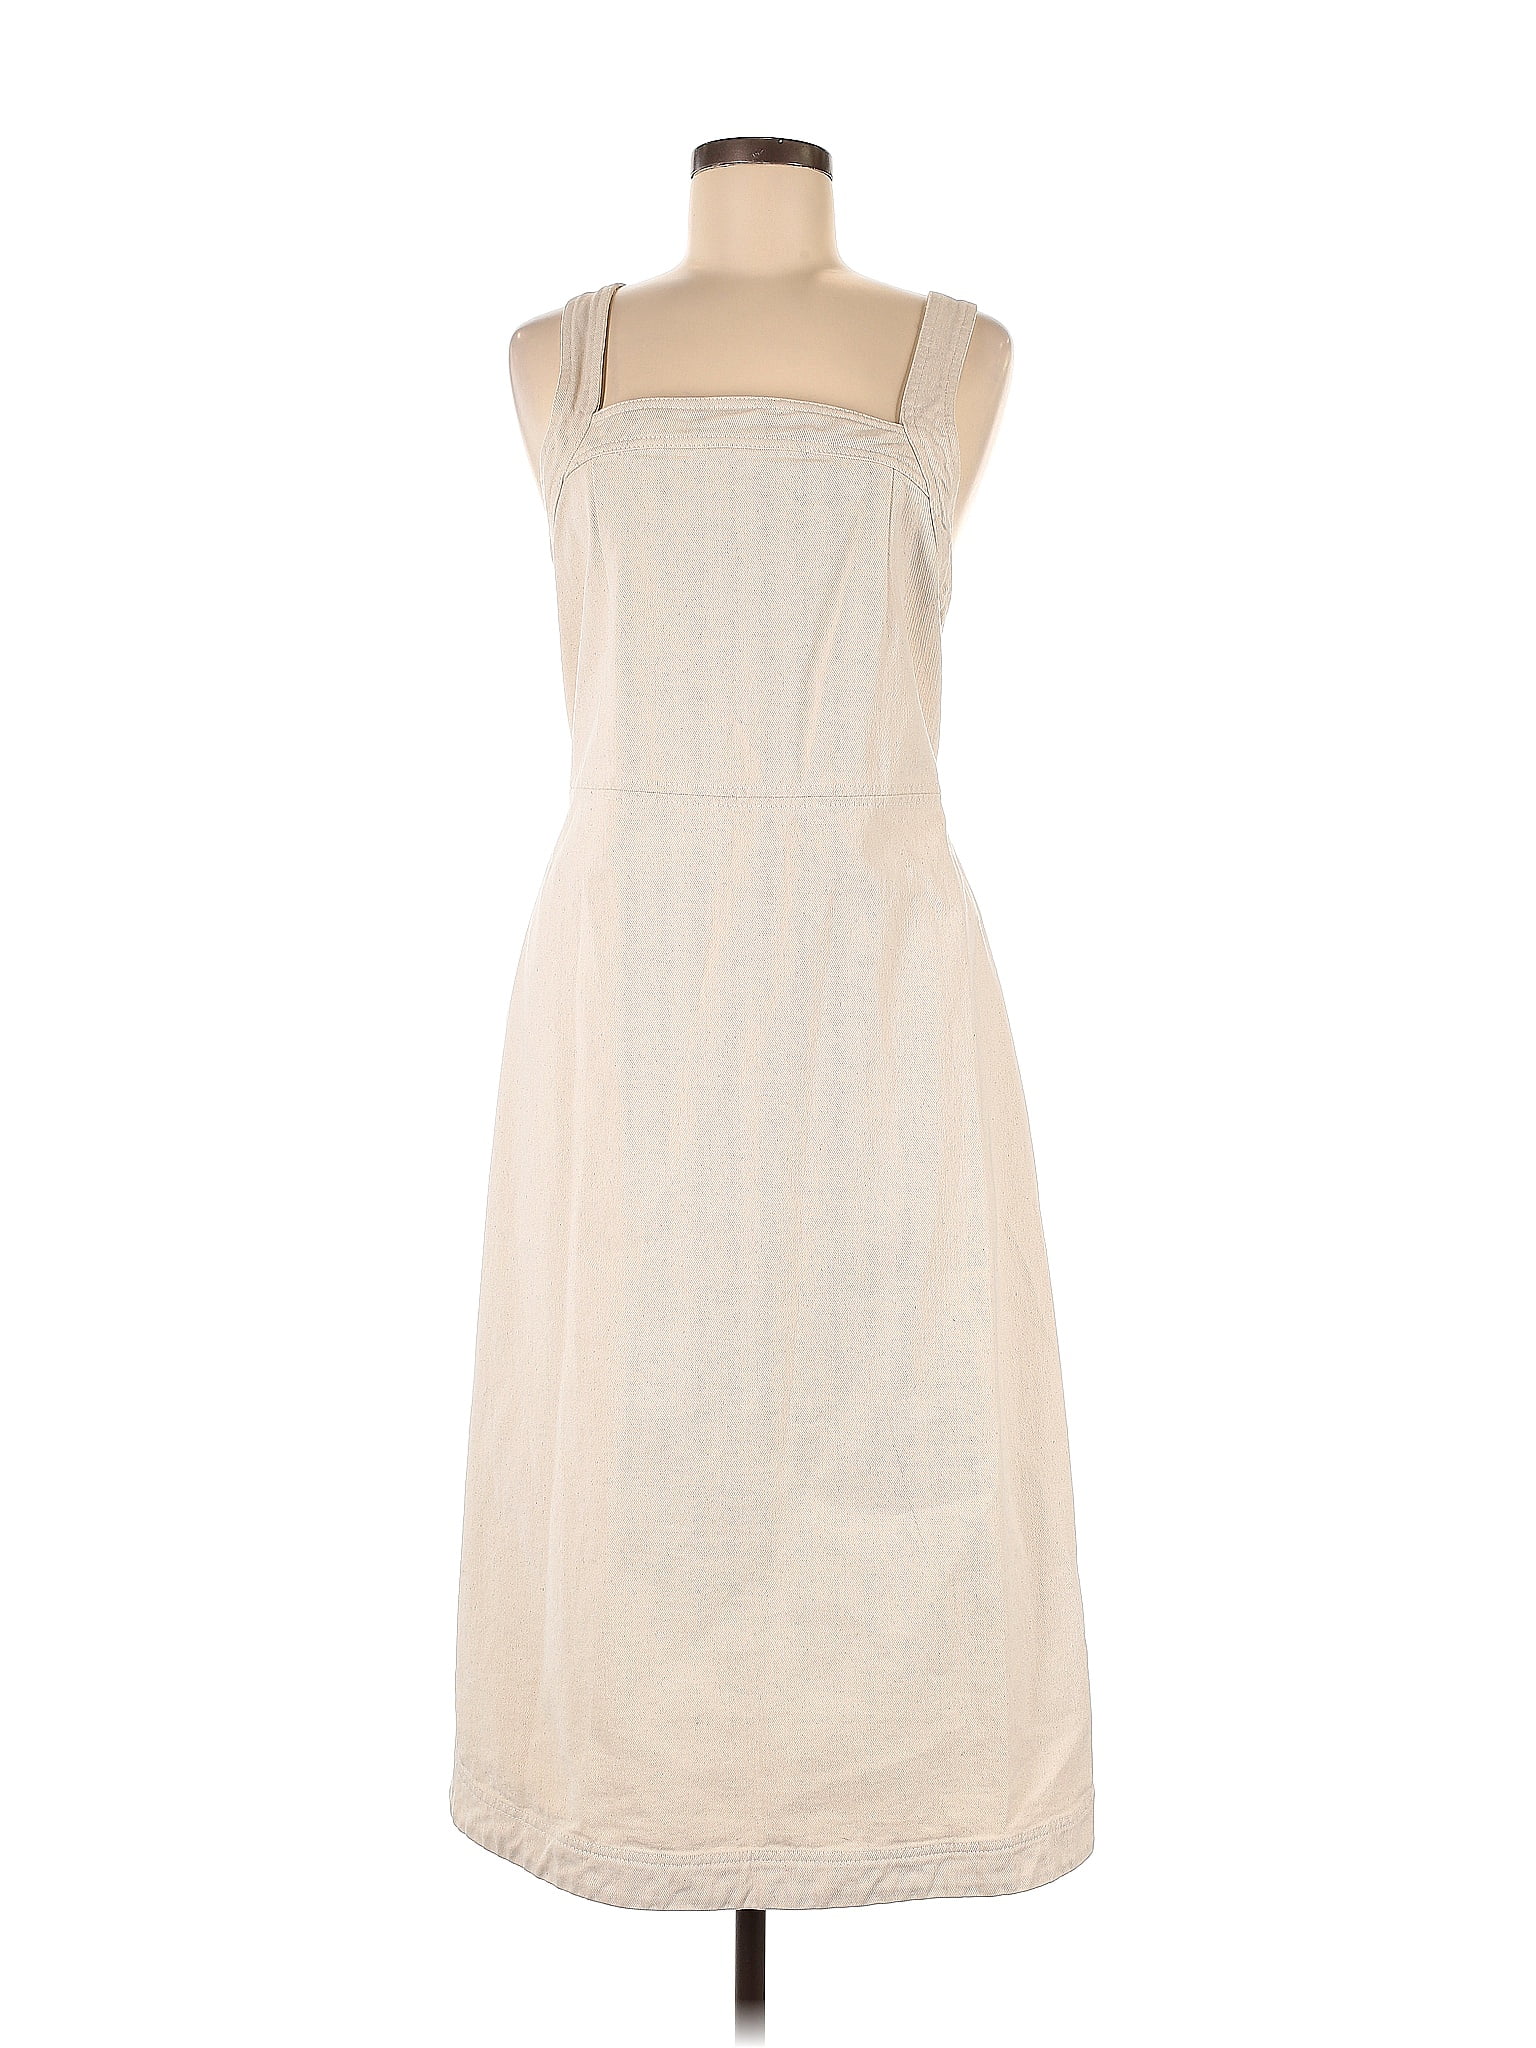 H&M 100% Cotton Solid Ivory Casual Dress Size M - 53% off | ThredUp